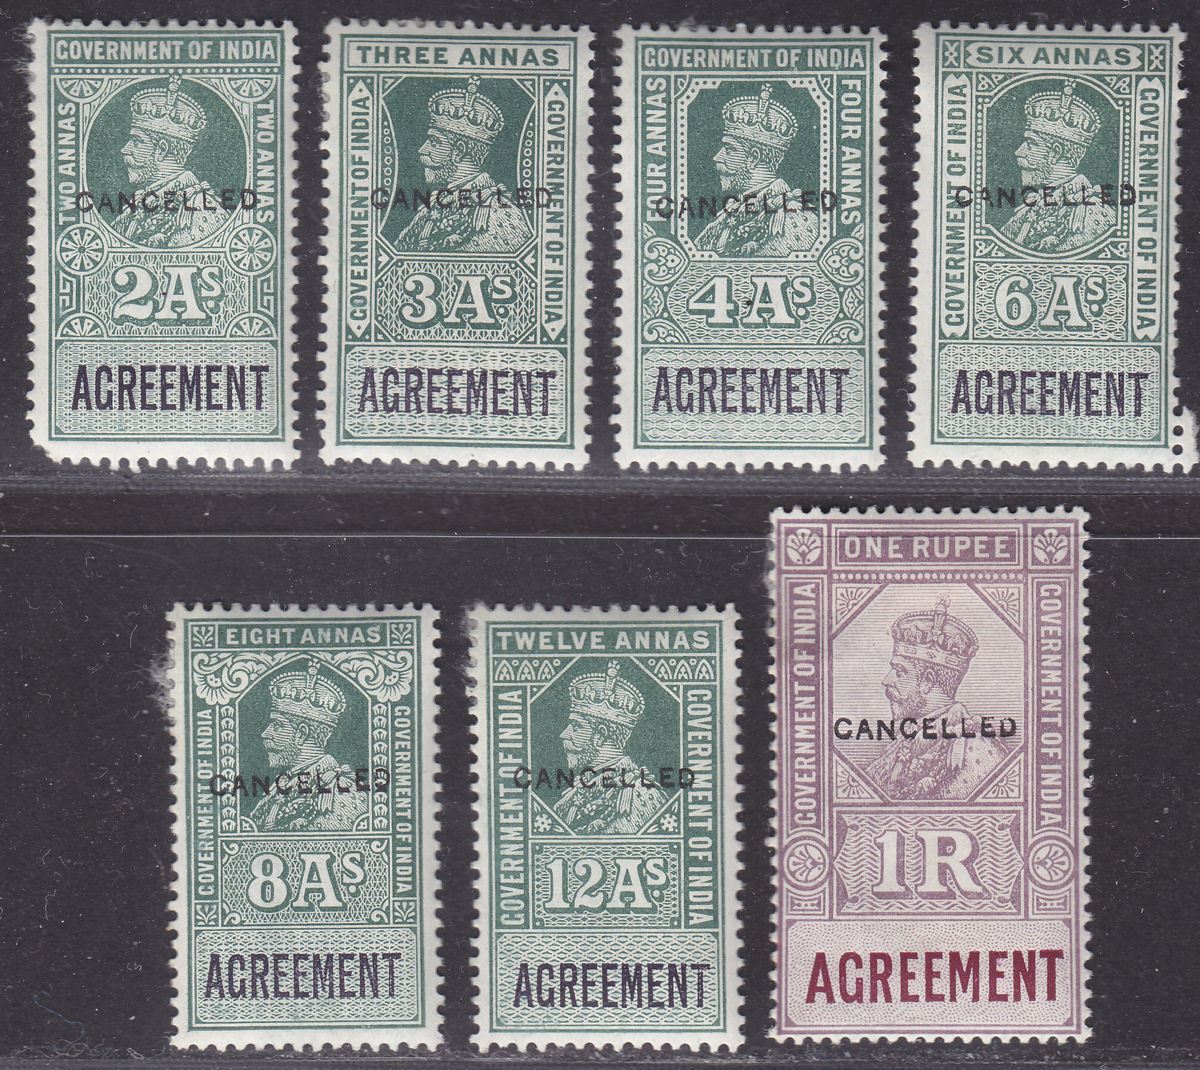 India 1923 KGV Revenue Agreement Type 25 CANCELLED Set BF7c-BF13c